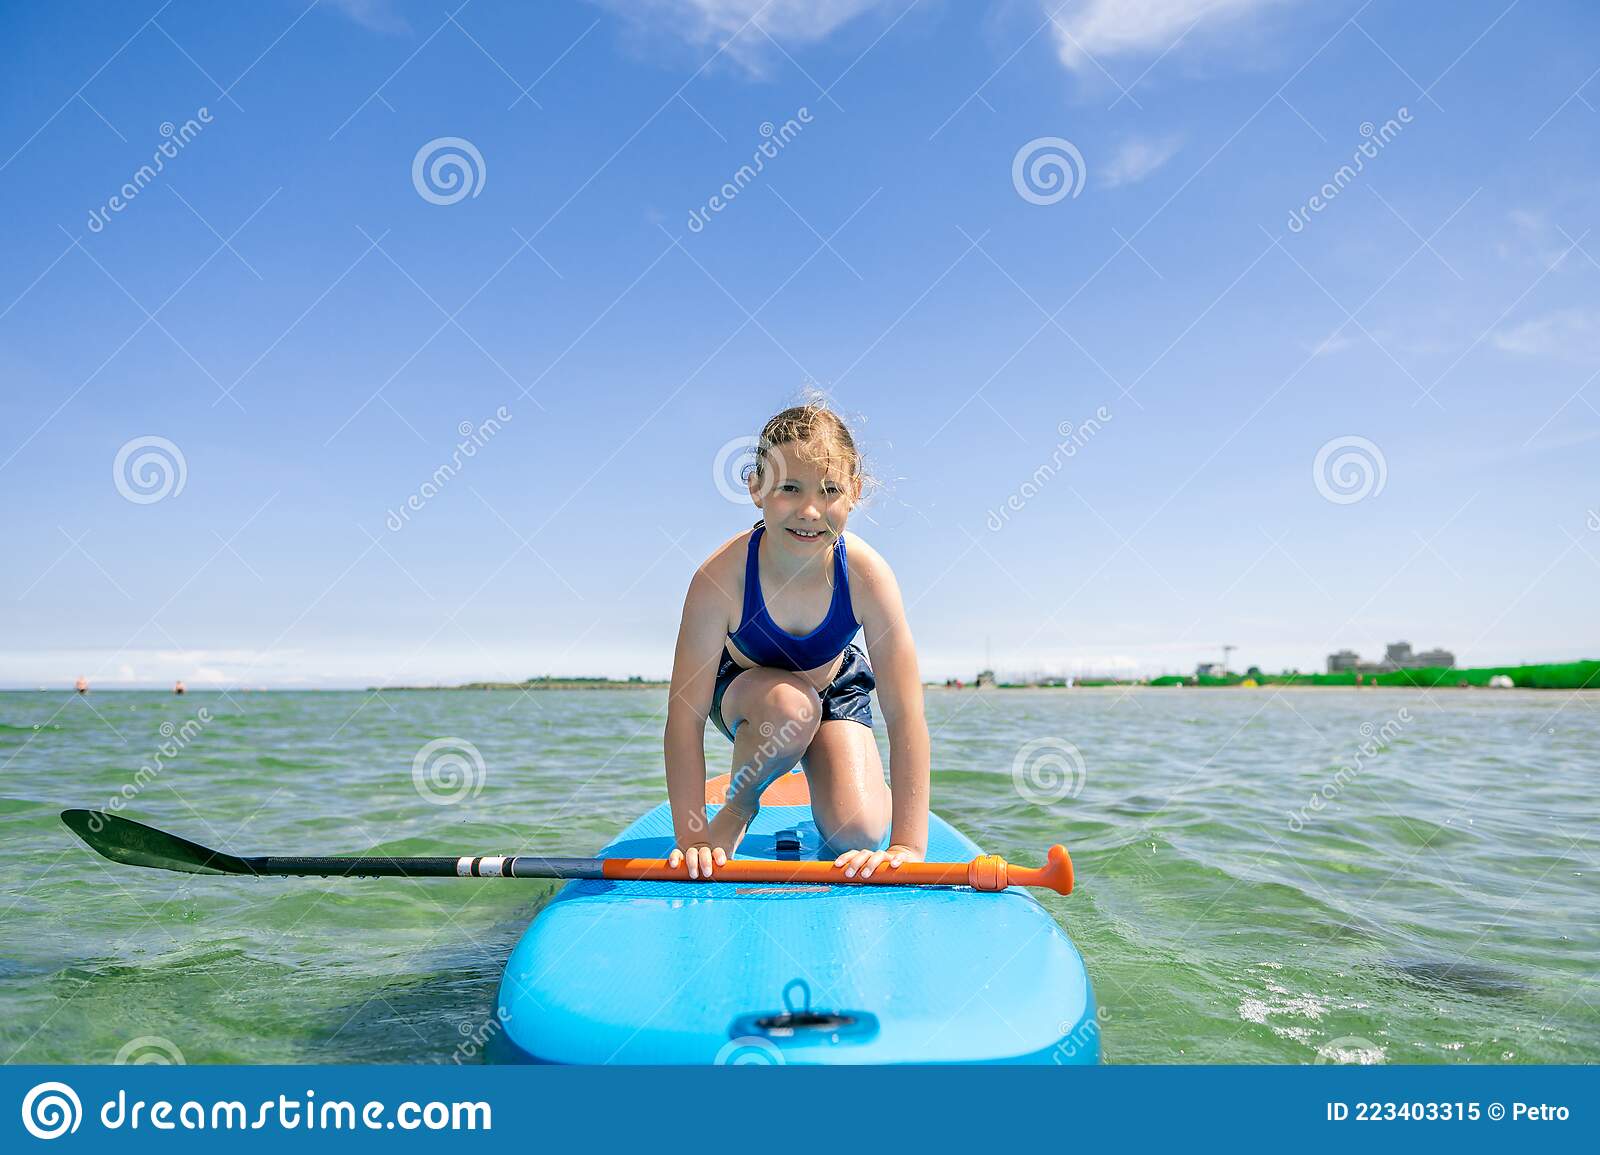 Detail Cute Paddle Board Pictures Nomer 56